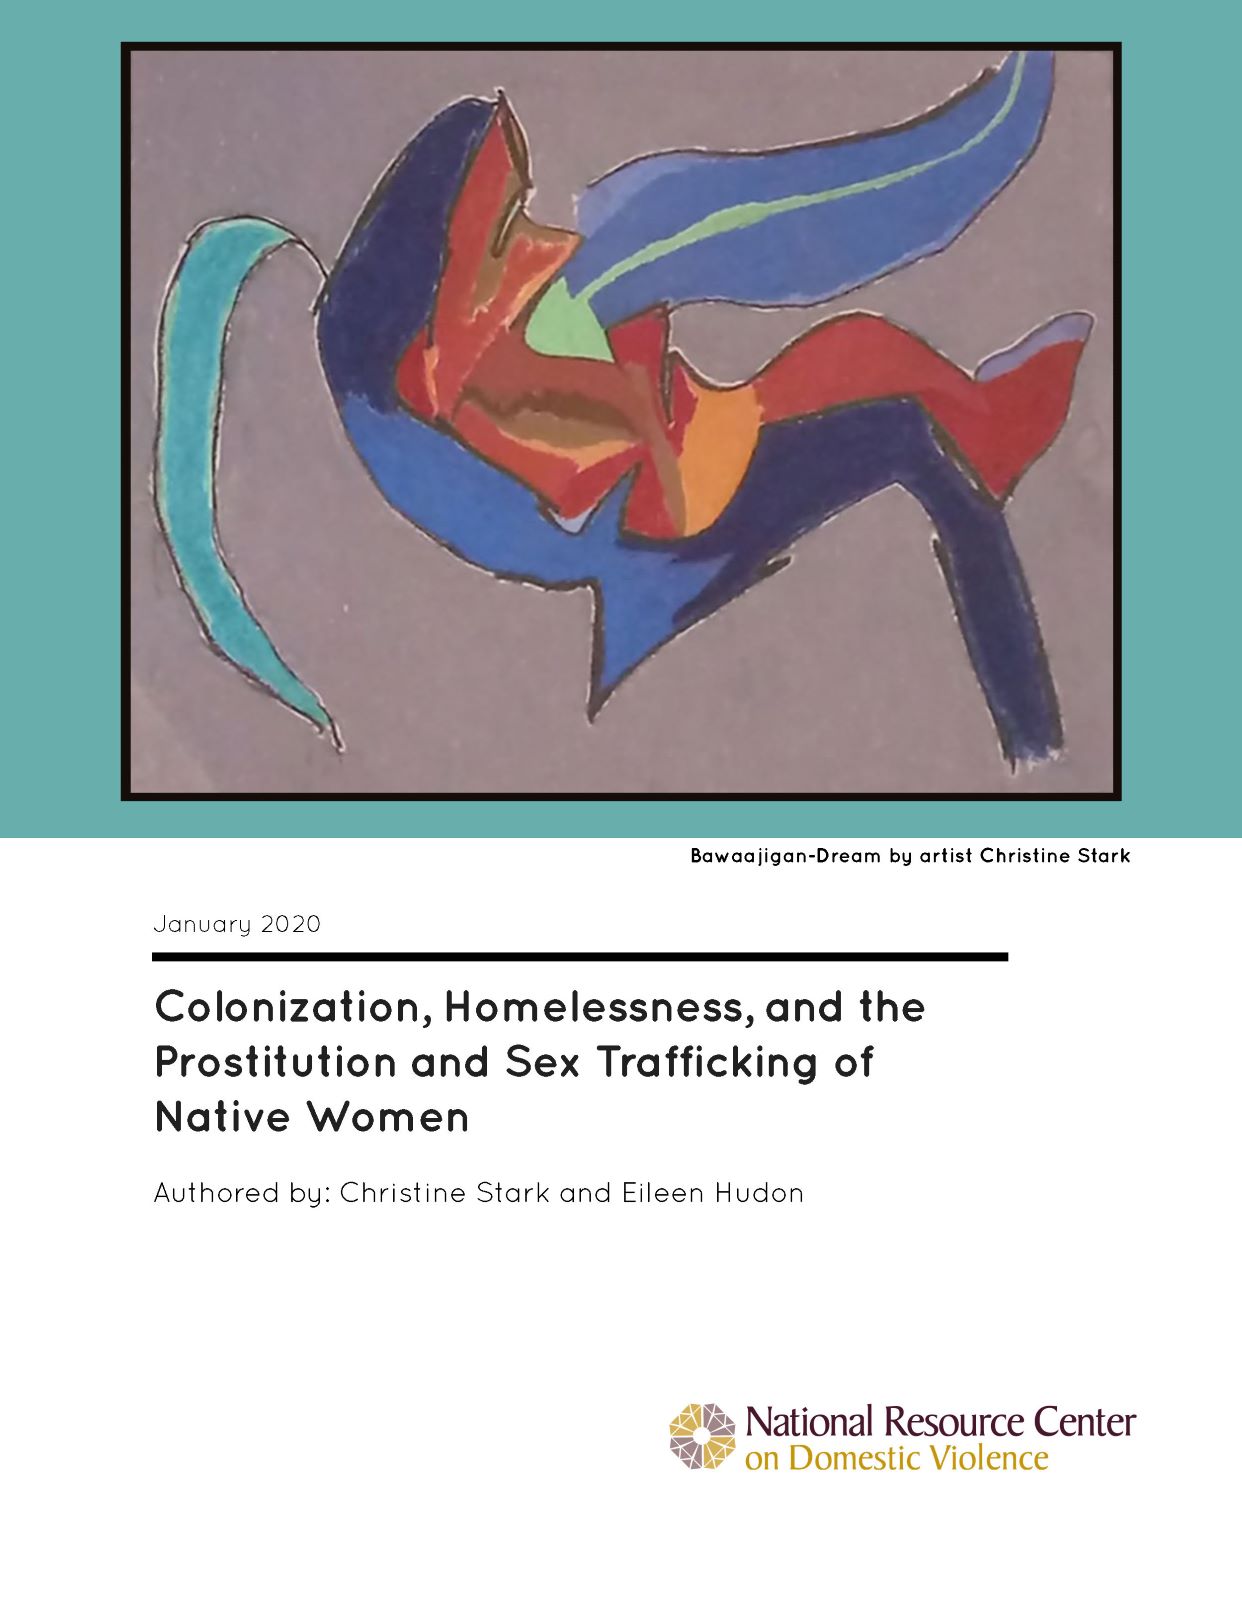 Colonization, Homelessness, and the Prostitution and Sex Trafficking of Native Women